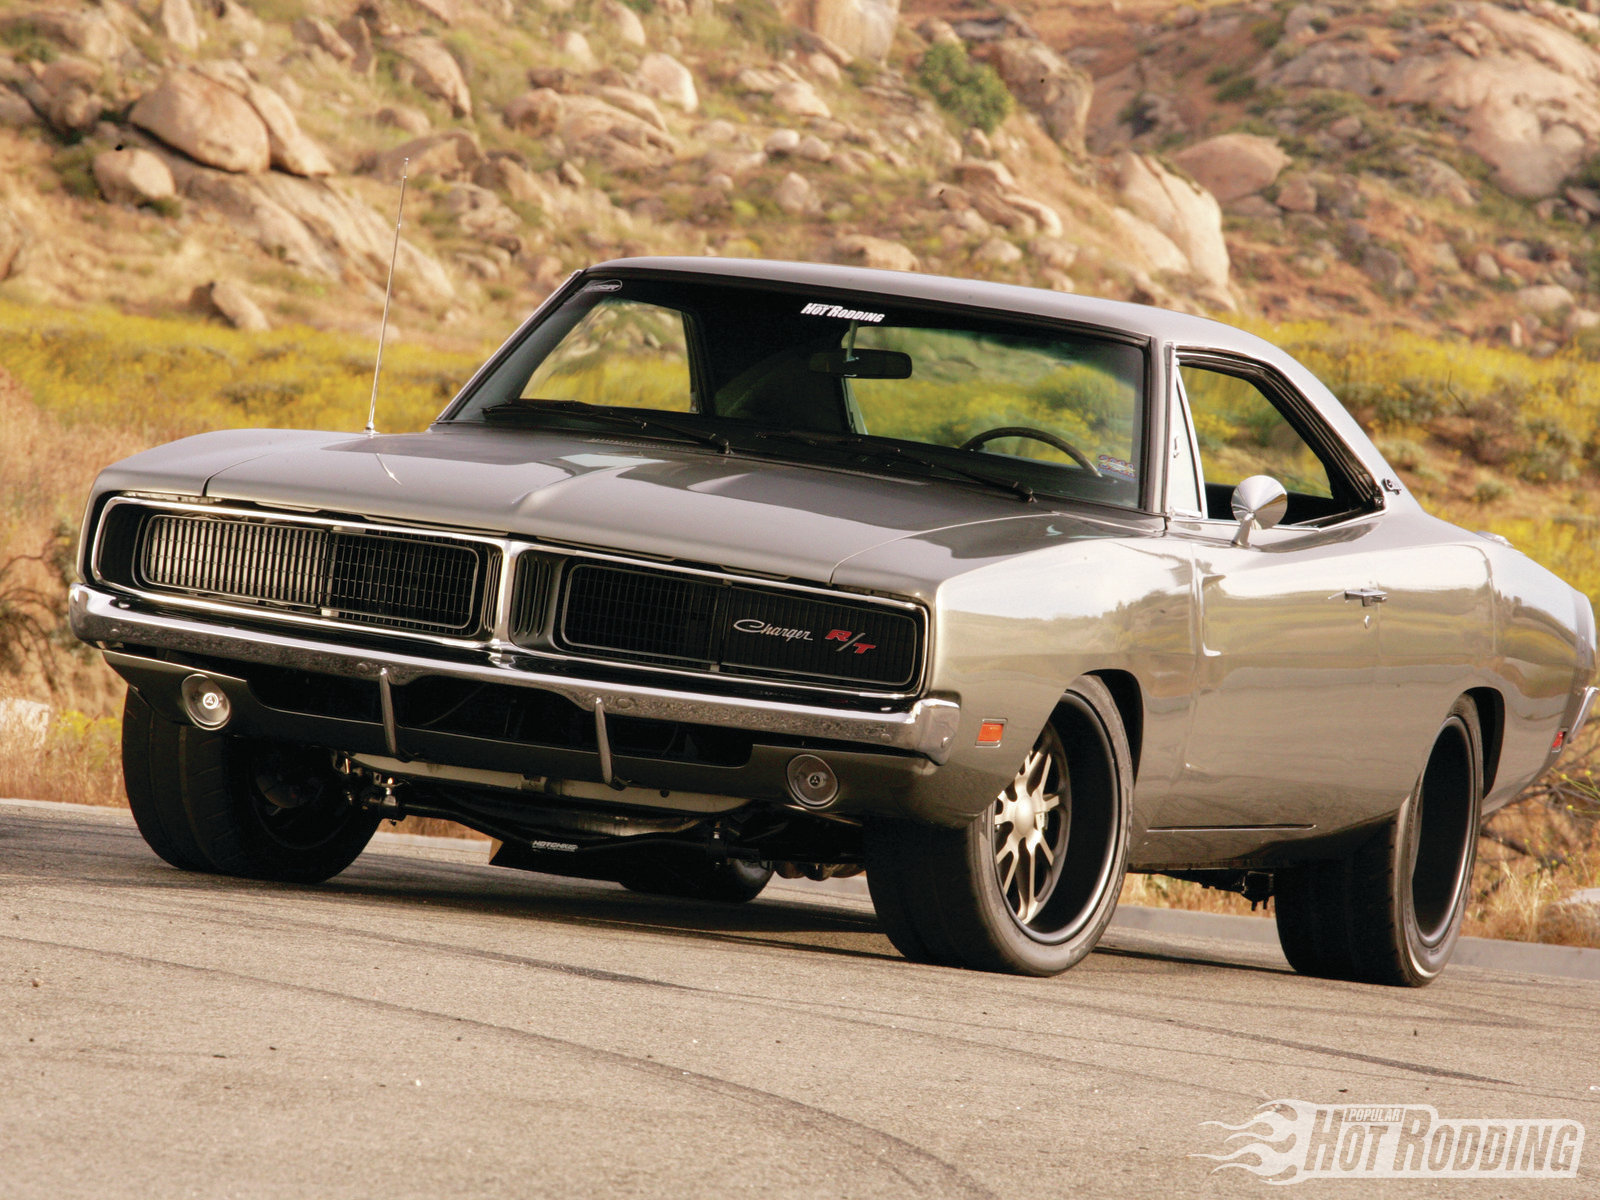    1969 Dodge Charger Dodge Hot Rod Muscle Car Classic Car Wallpaper